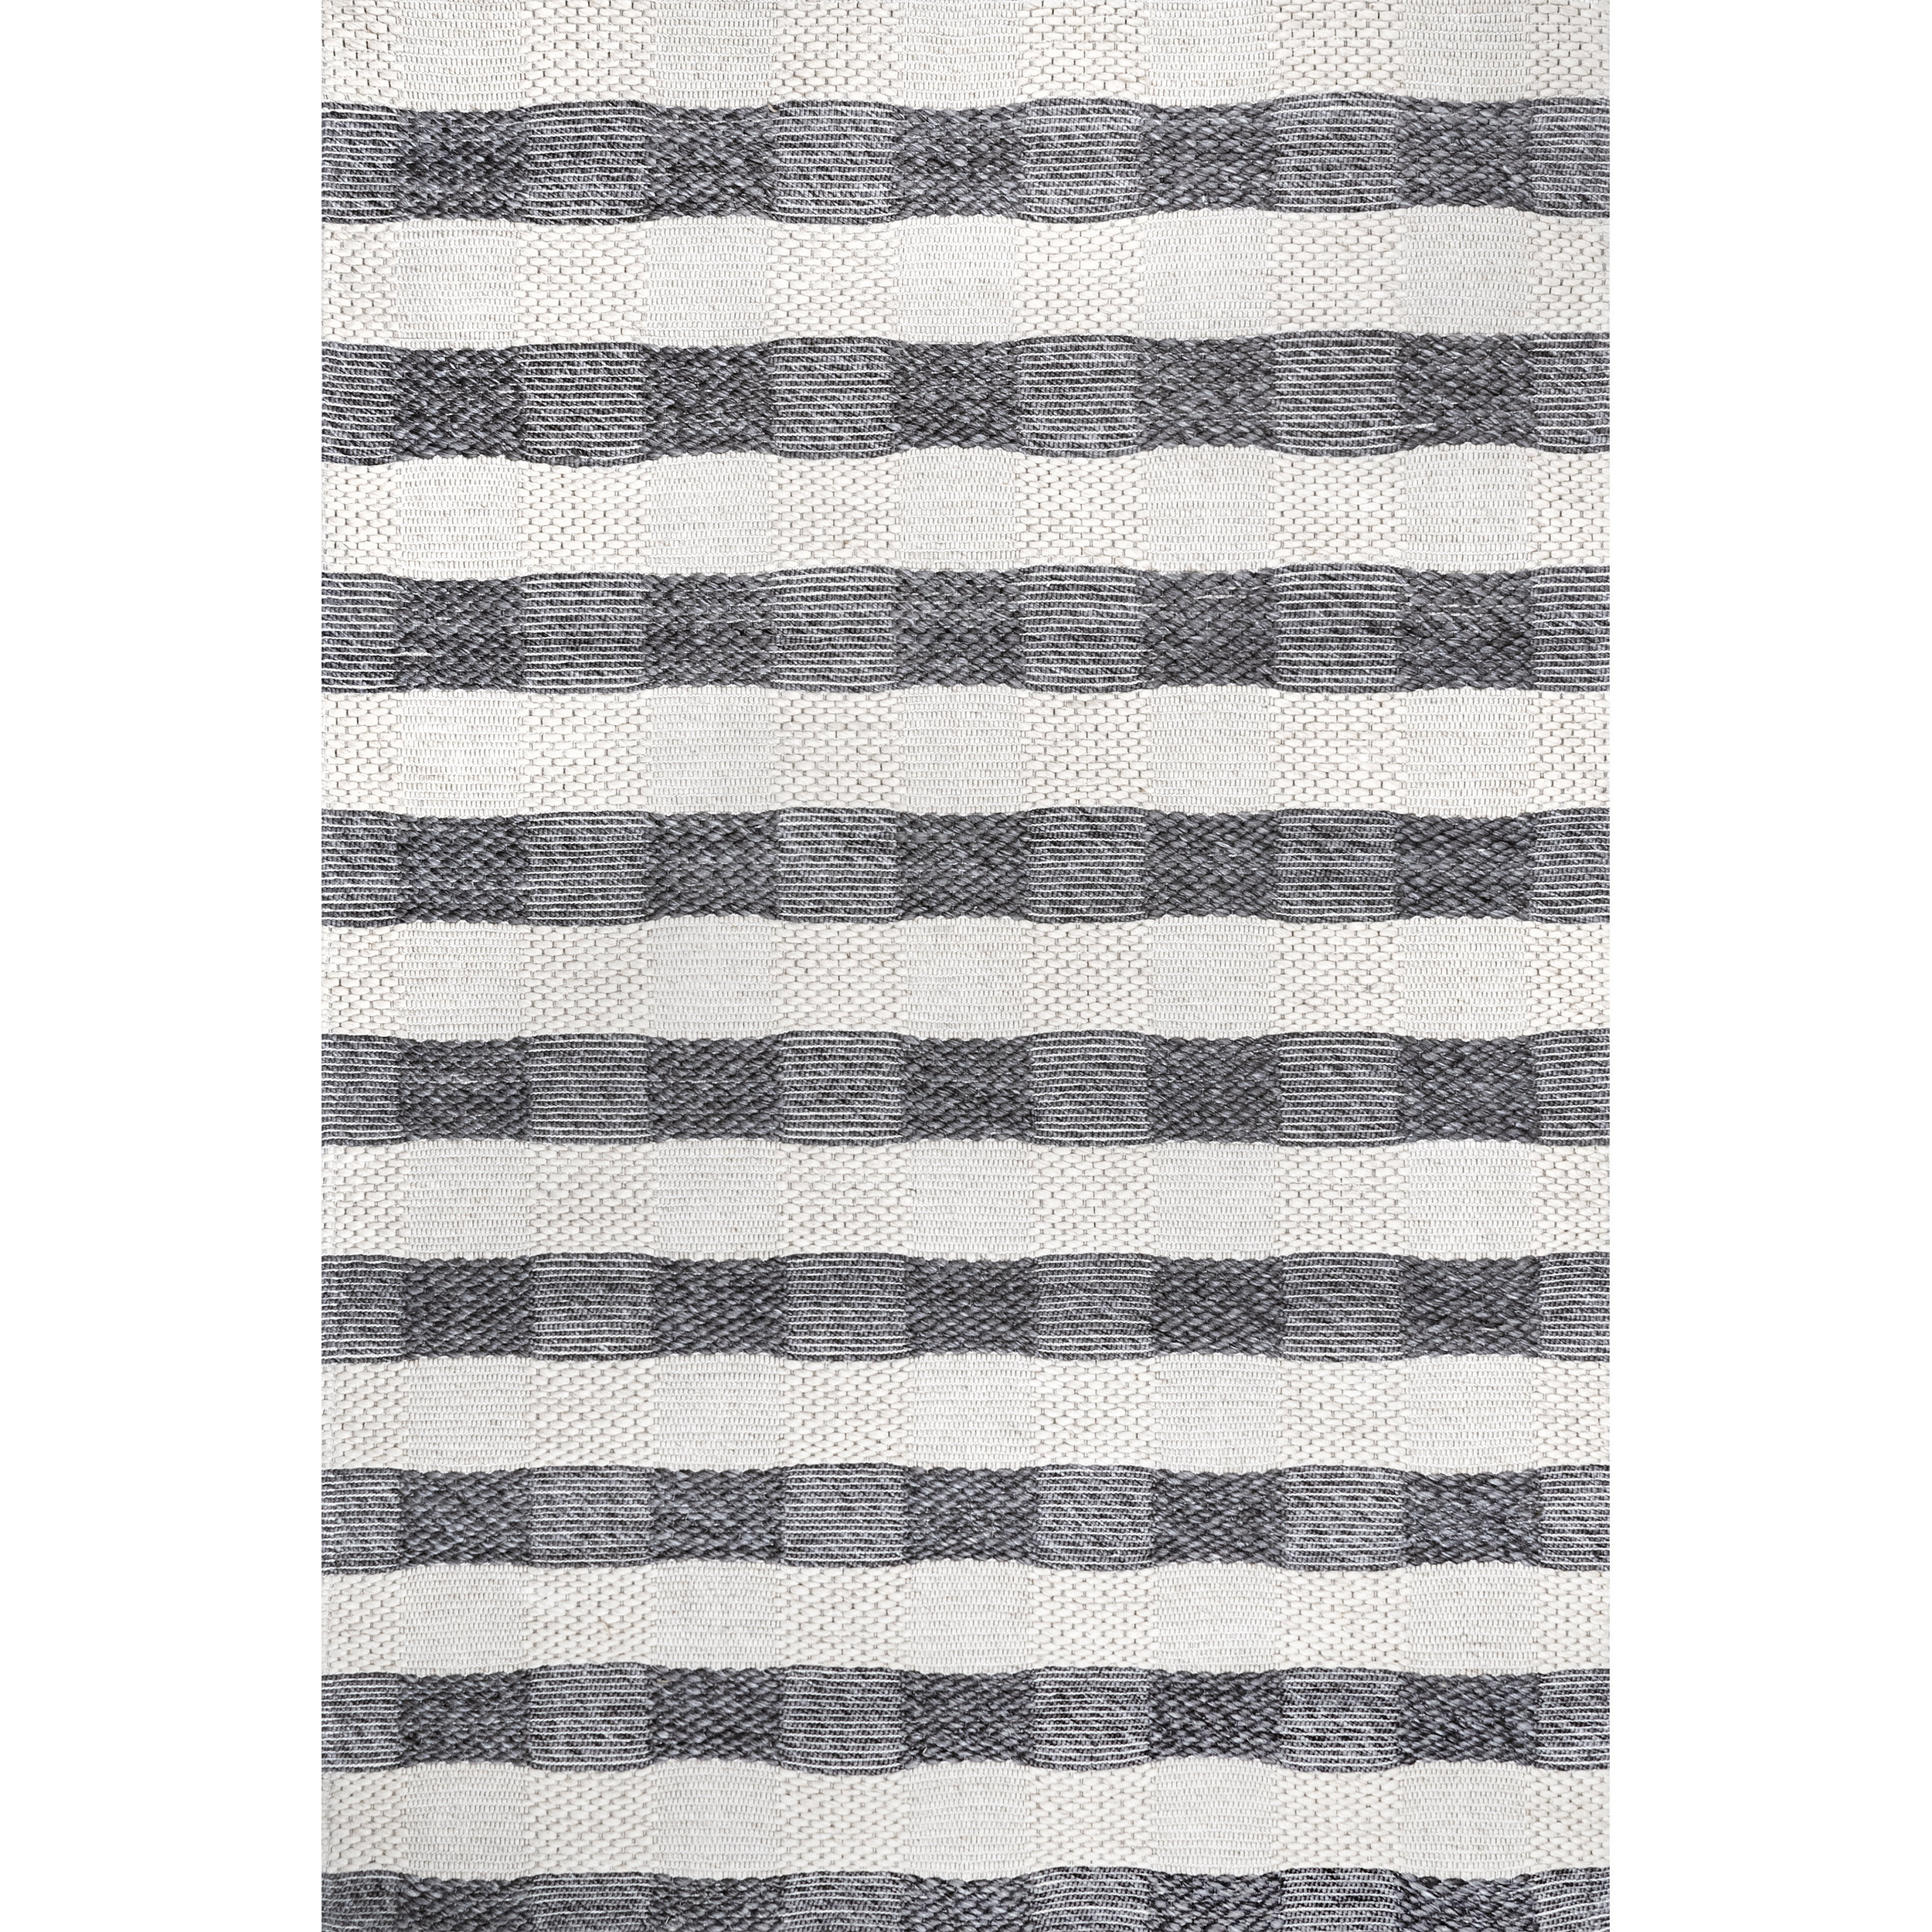 Sophie Striped Wool Gray Area Rug nuLOOM Rug Size: Rectangle 8' x 10